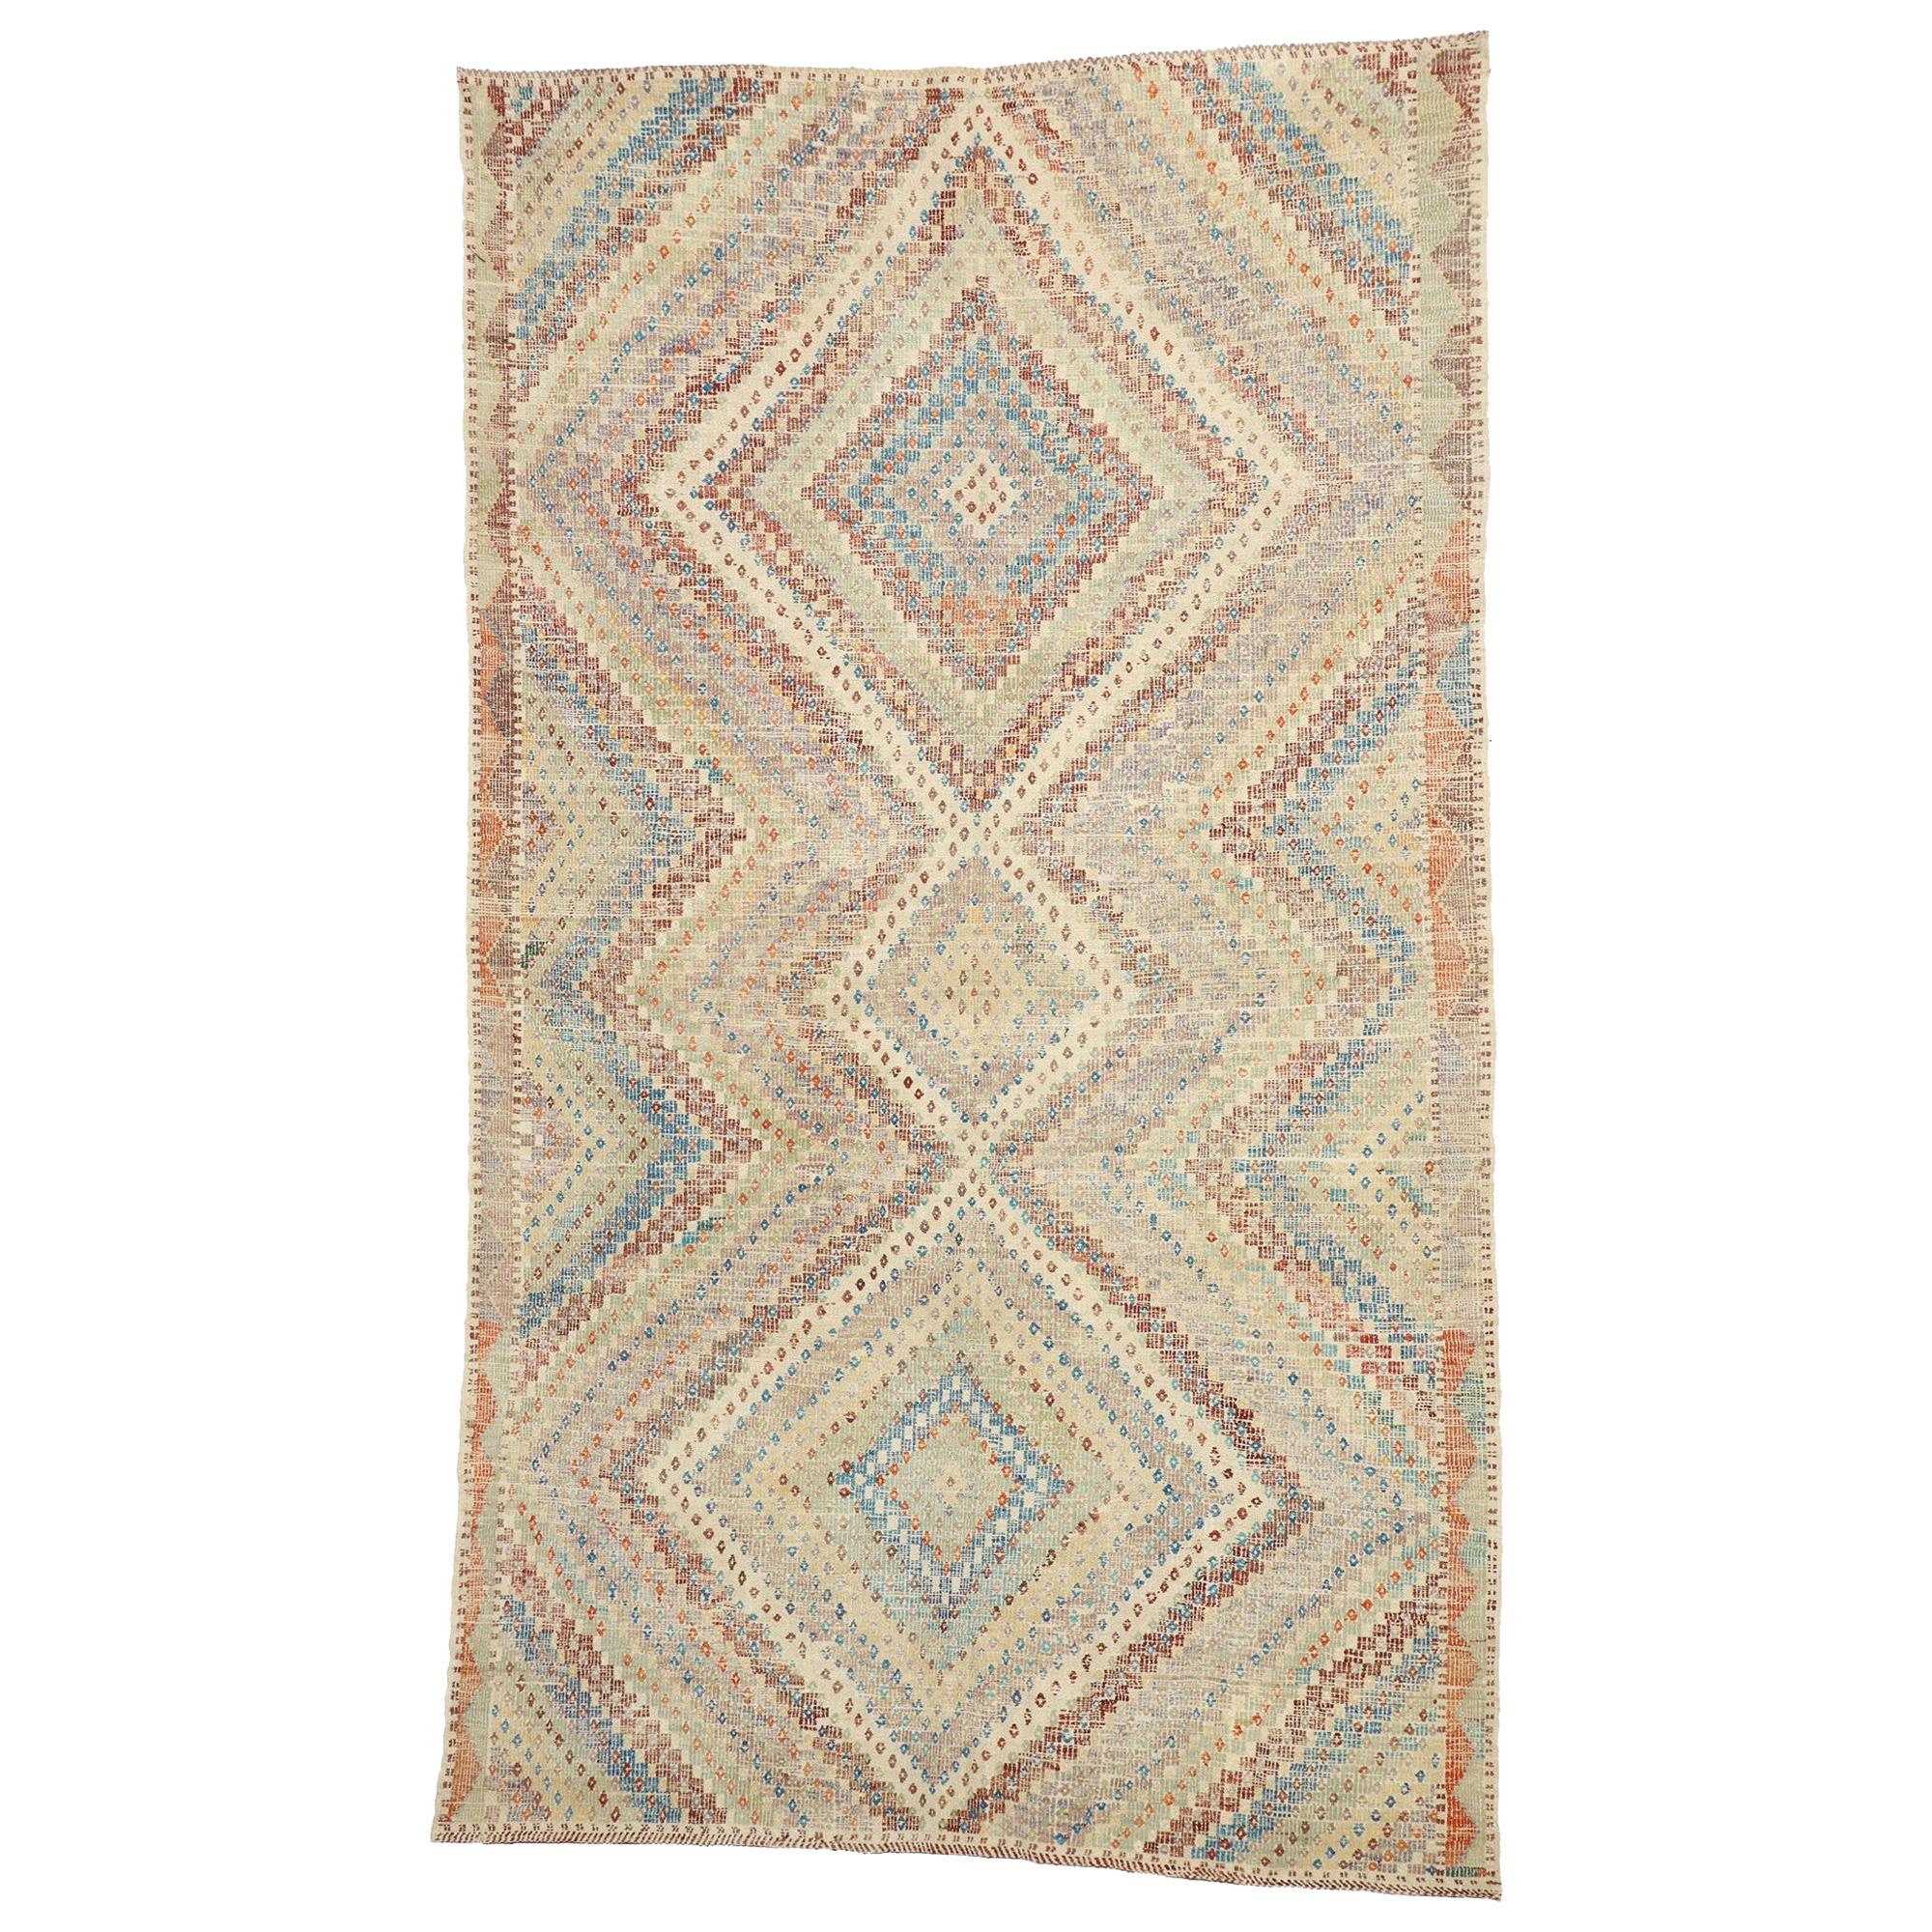 Distressed Vintage Turkish Kilim Rug with Southern Living British Colonial Style